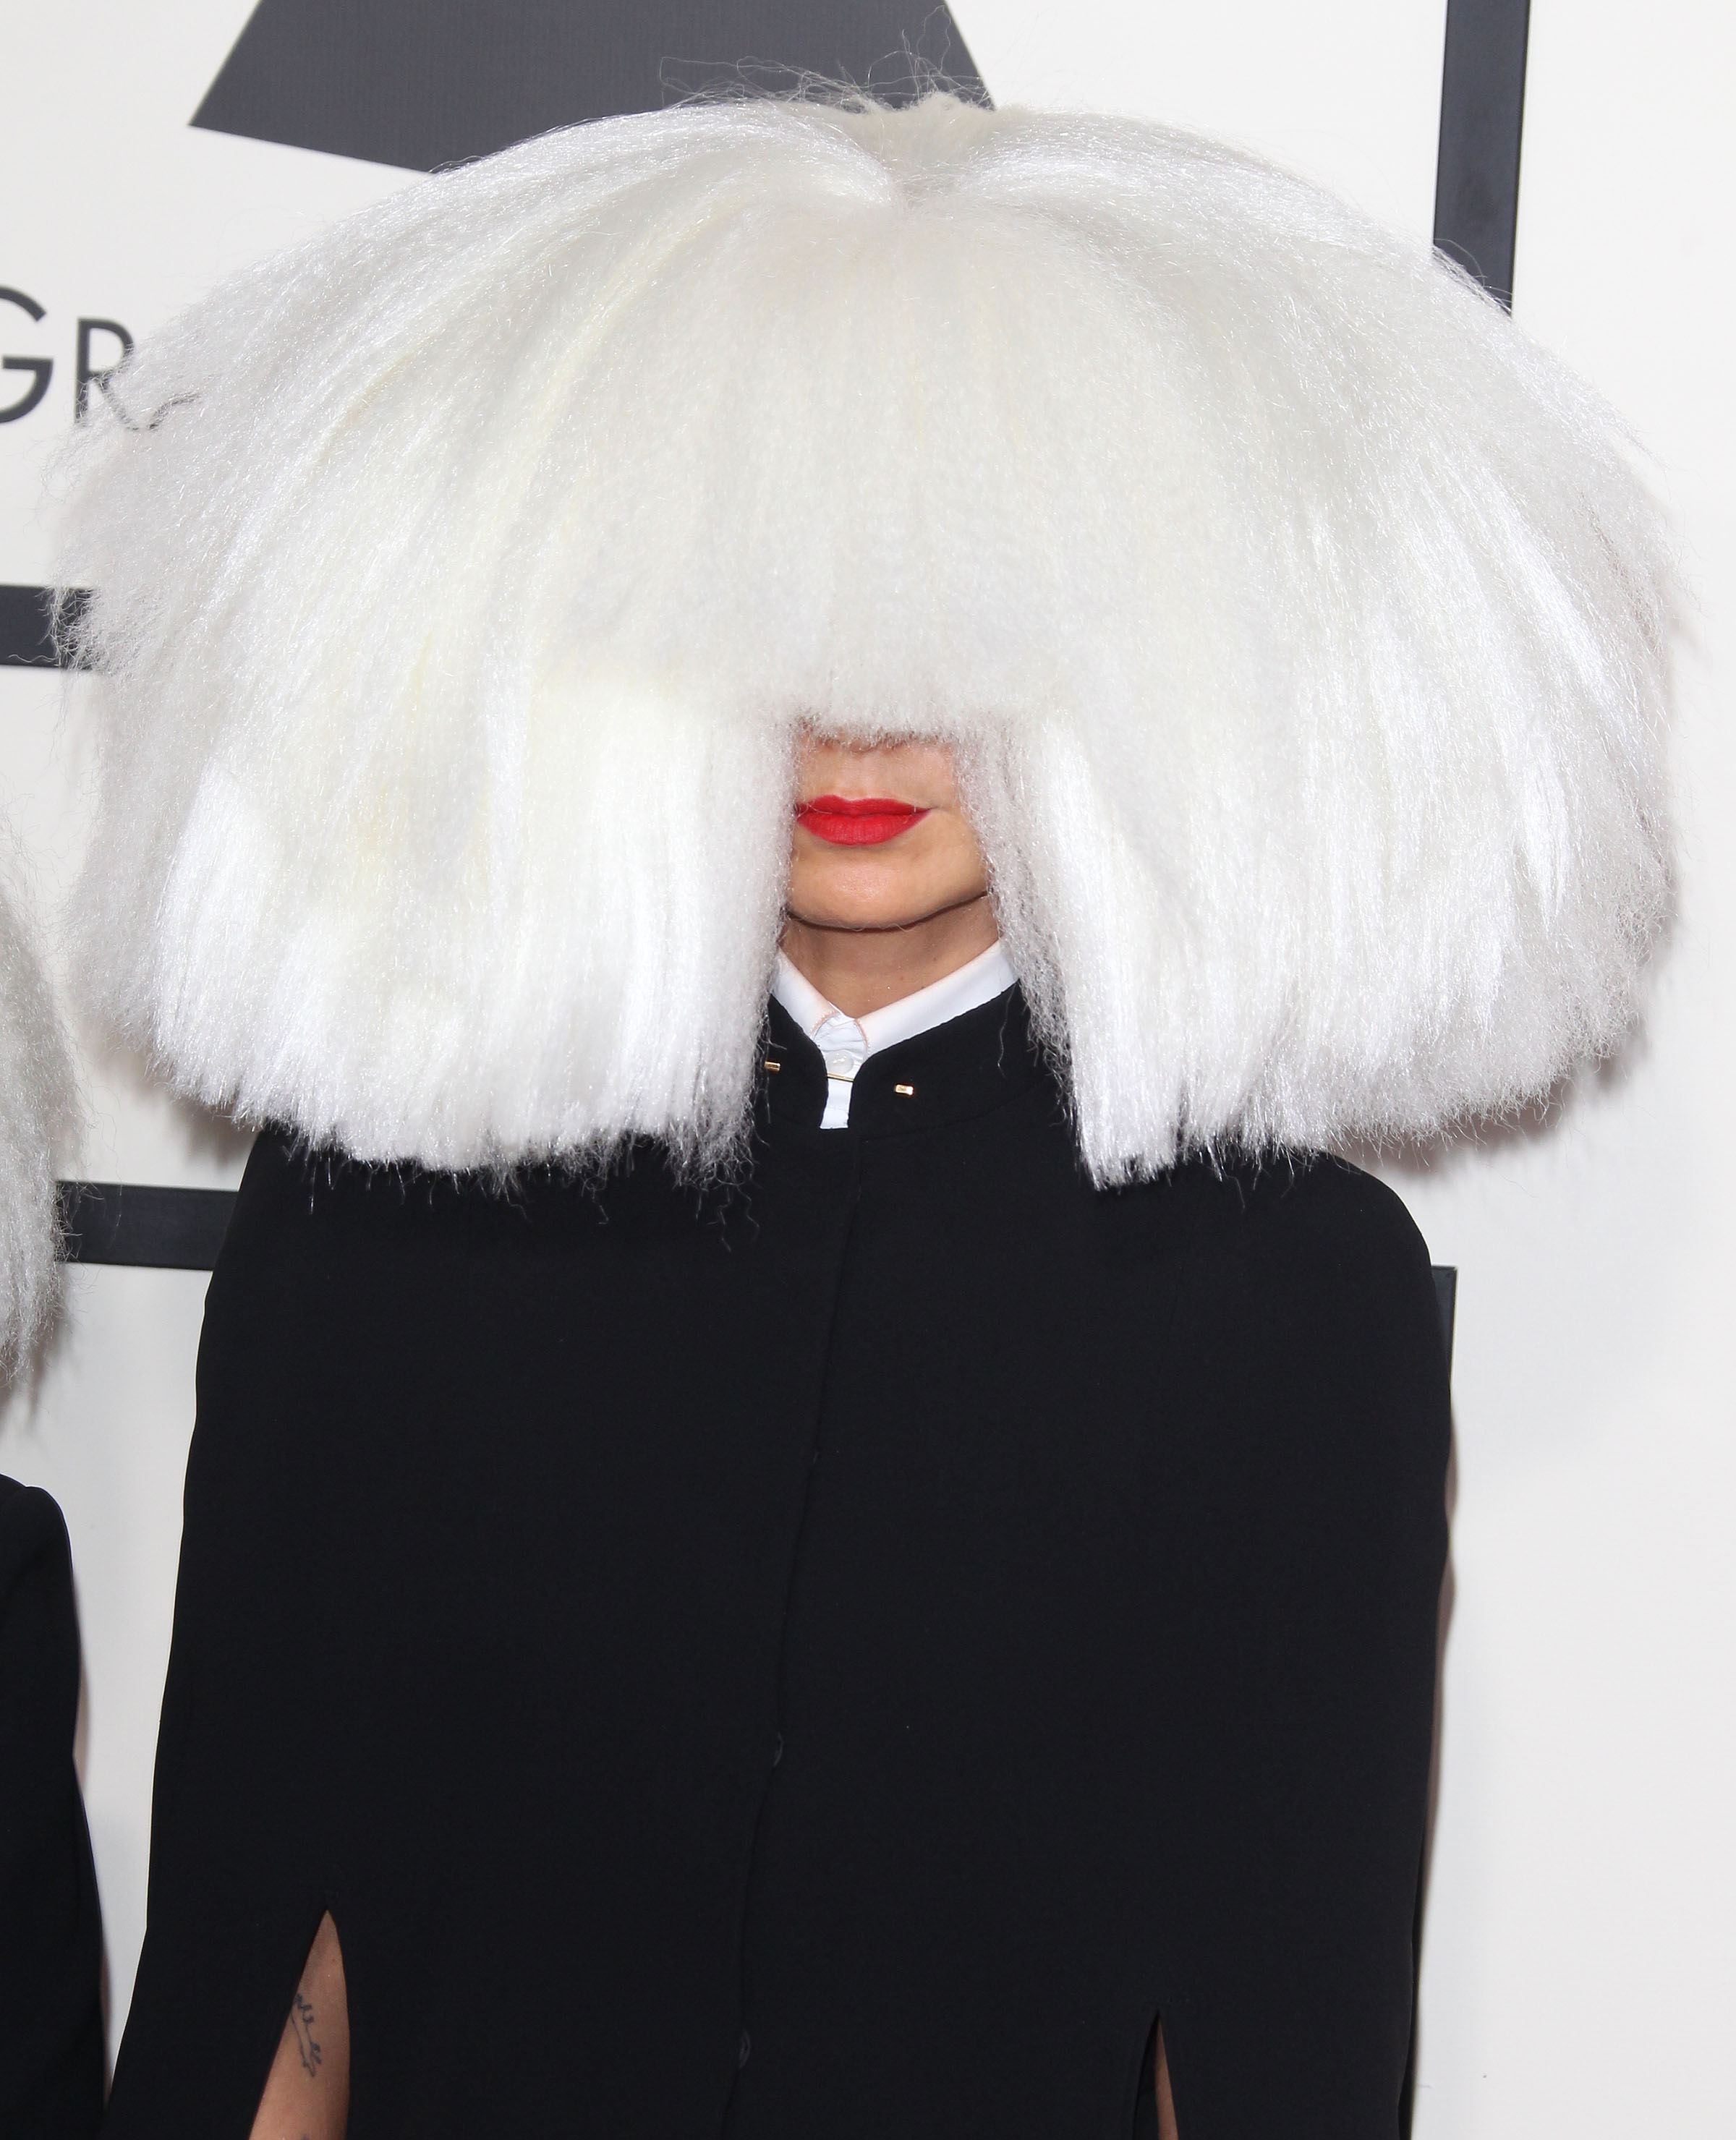 Grammys What The Fug: Sia